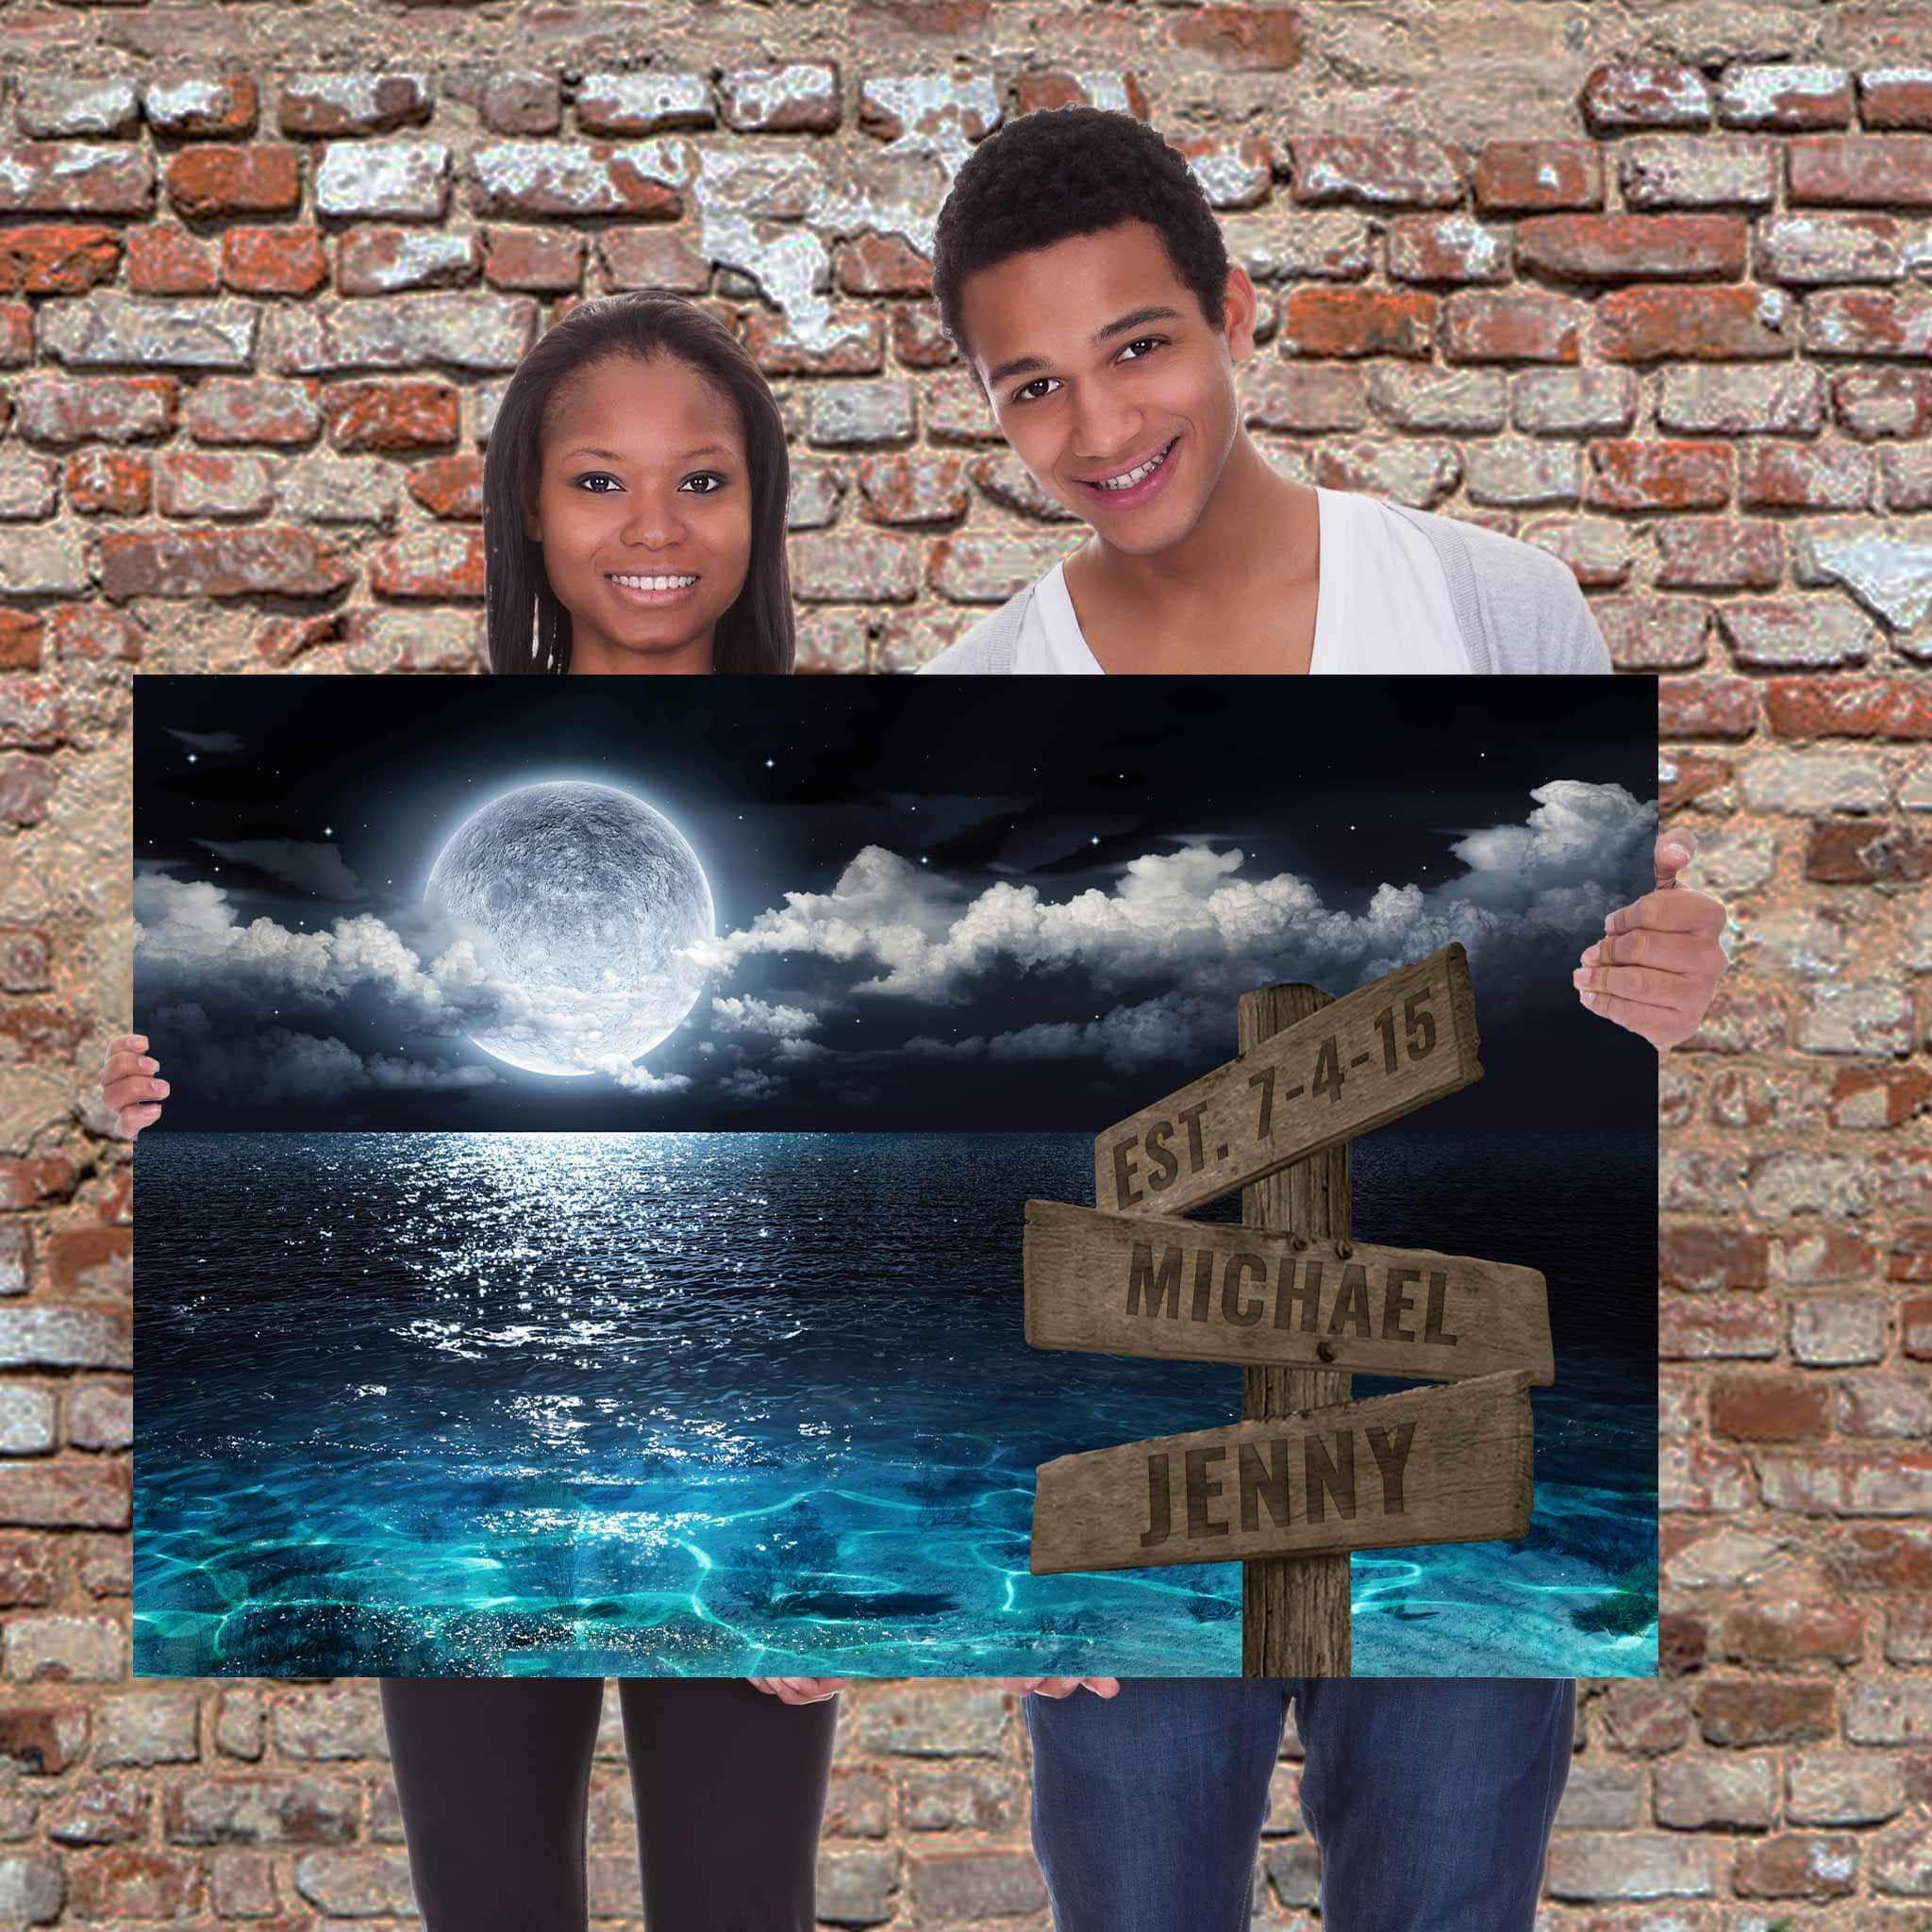 Full Moon Ocean Nightscape v1 Multiple Names Personalized Directional Sign CanvasCustomly Gifts